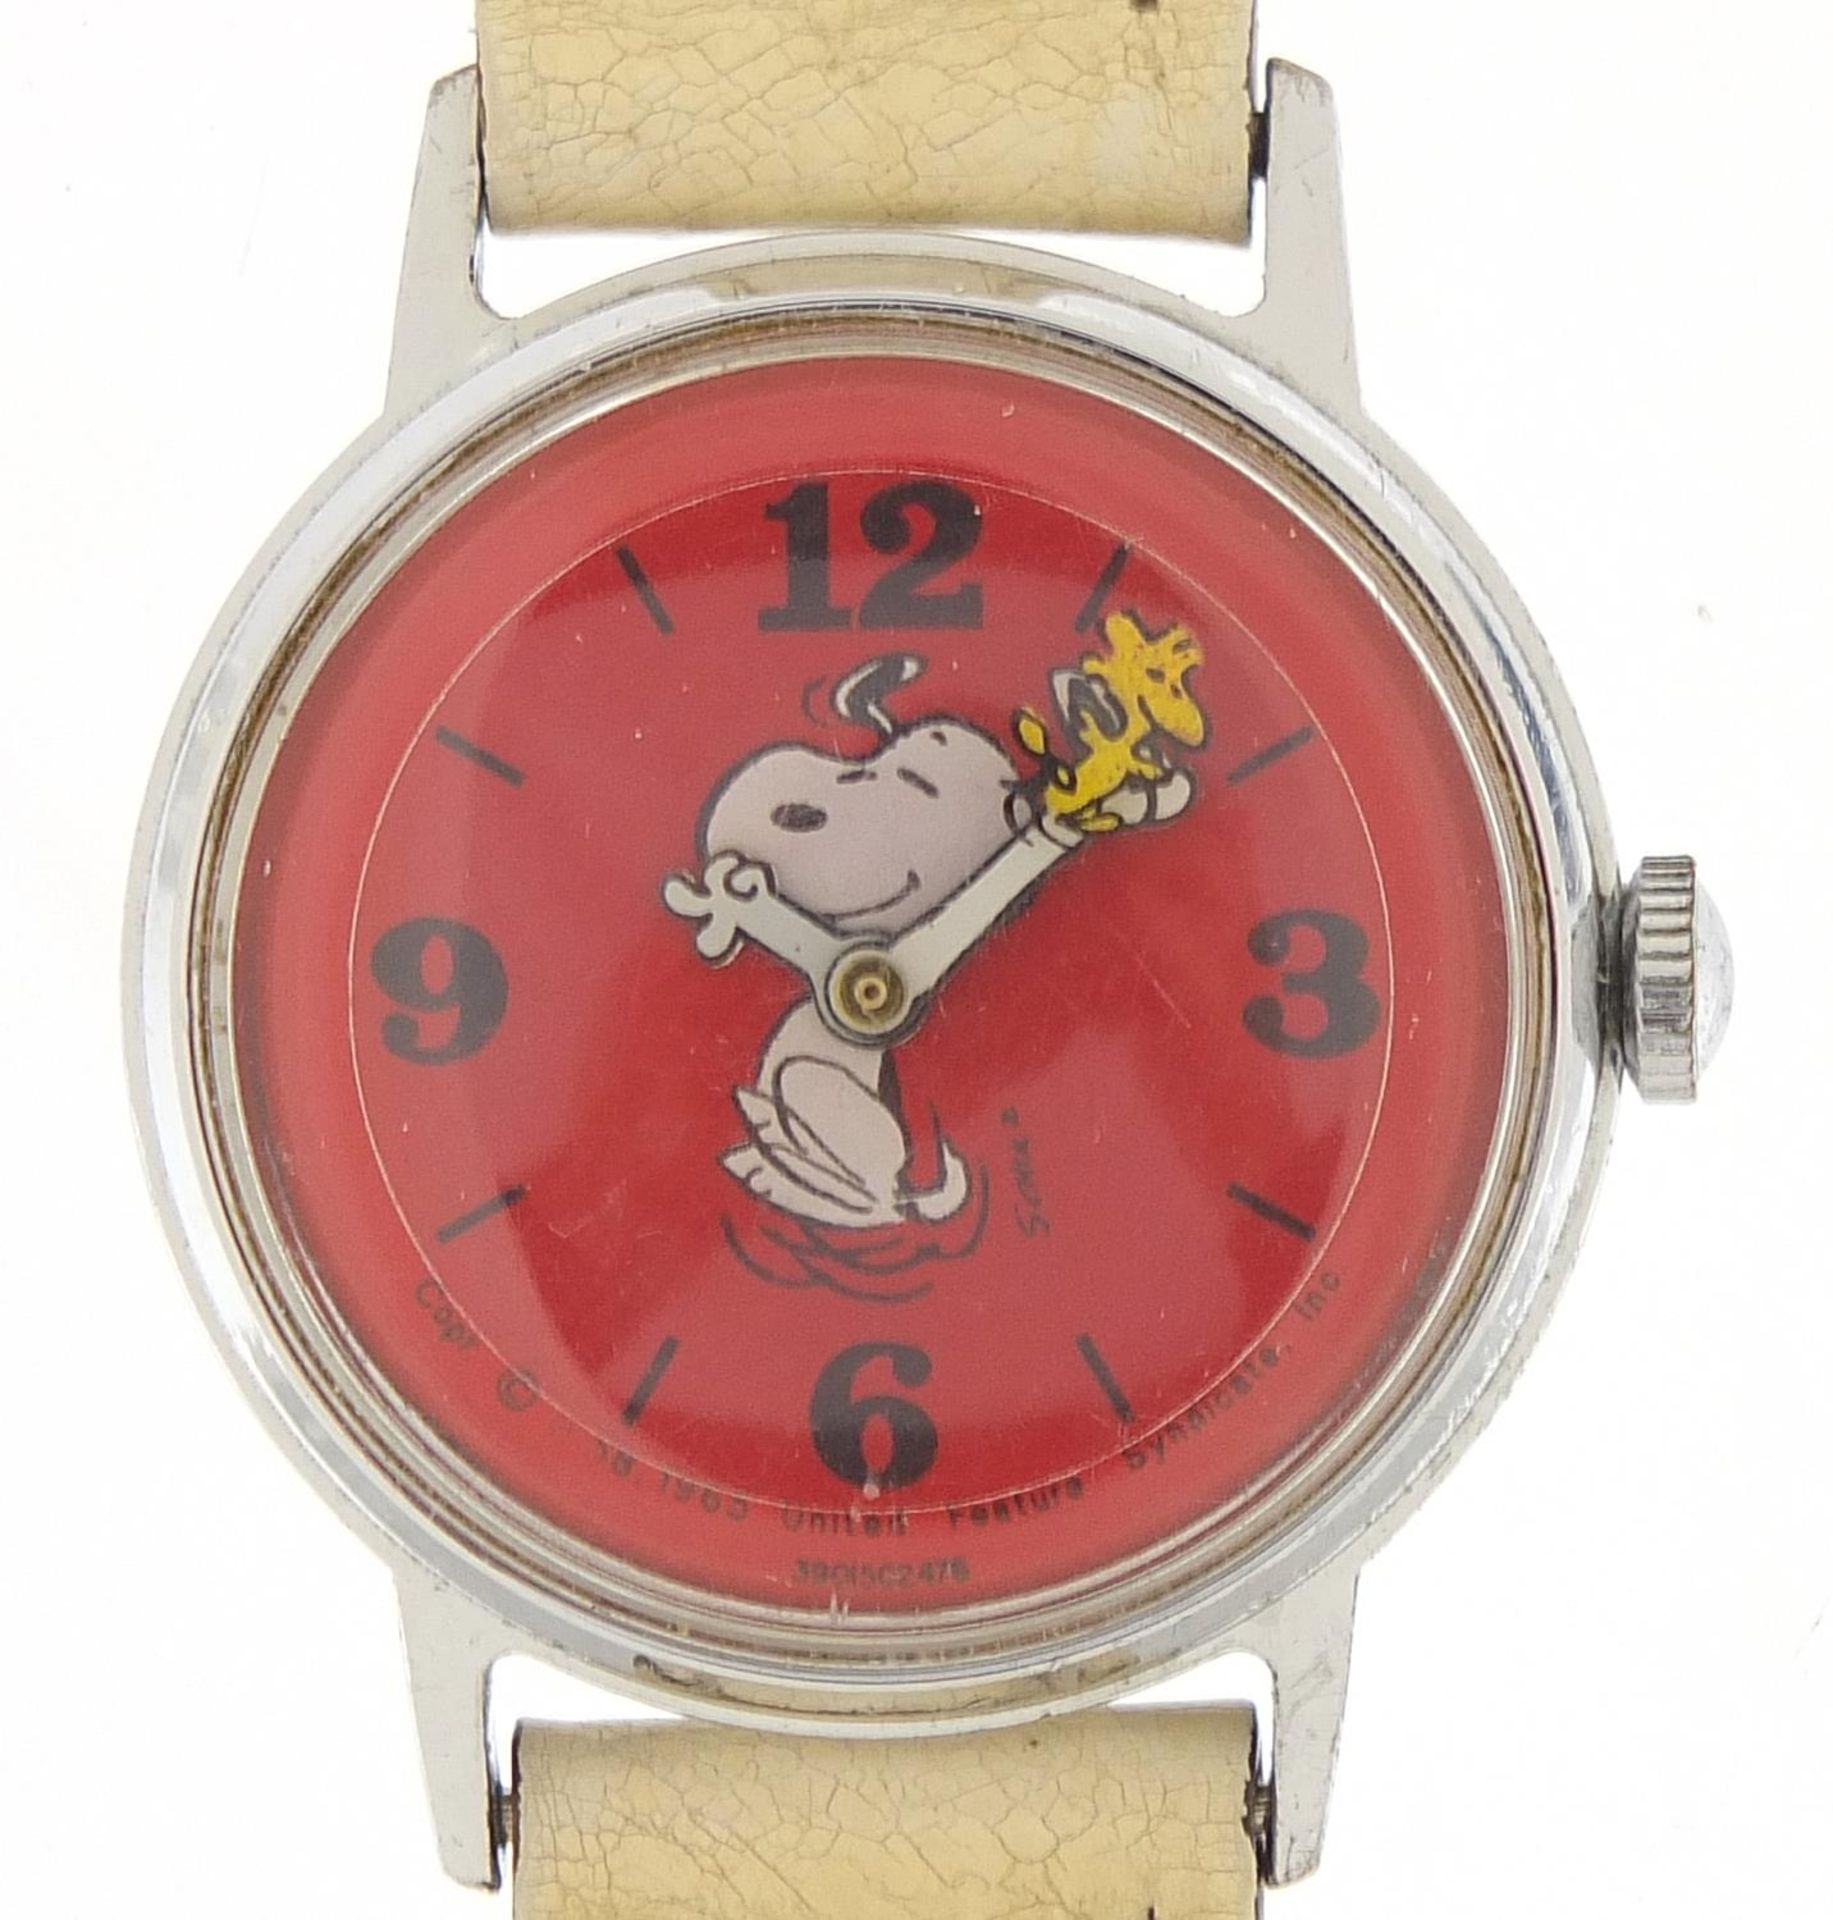 Vintage Snoopy wristwatch with moving arms, 31mm in diameter